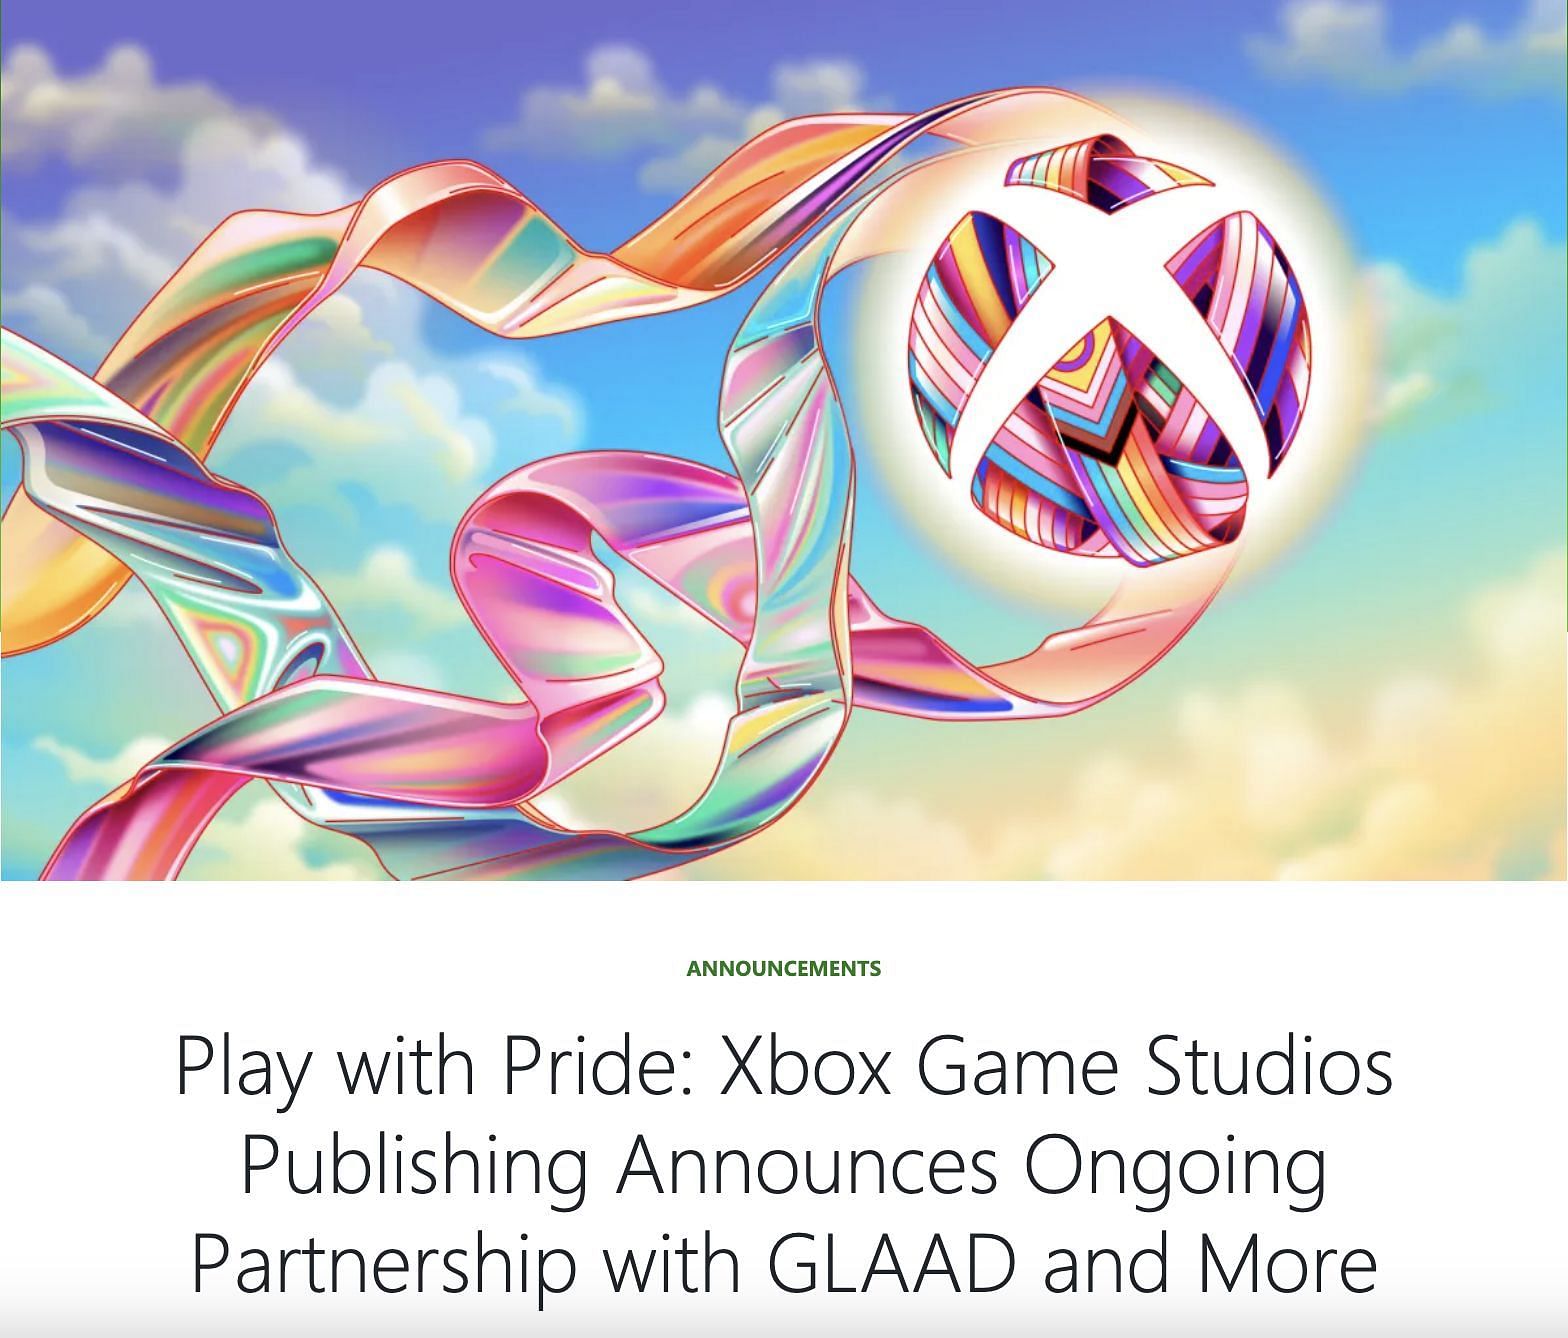 Social media users reacted to the gaming company&#039;s Pride logo: Reactions explored. (Image via Xbox)